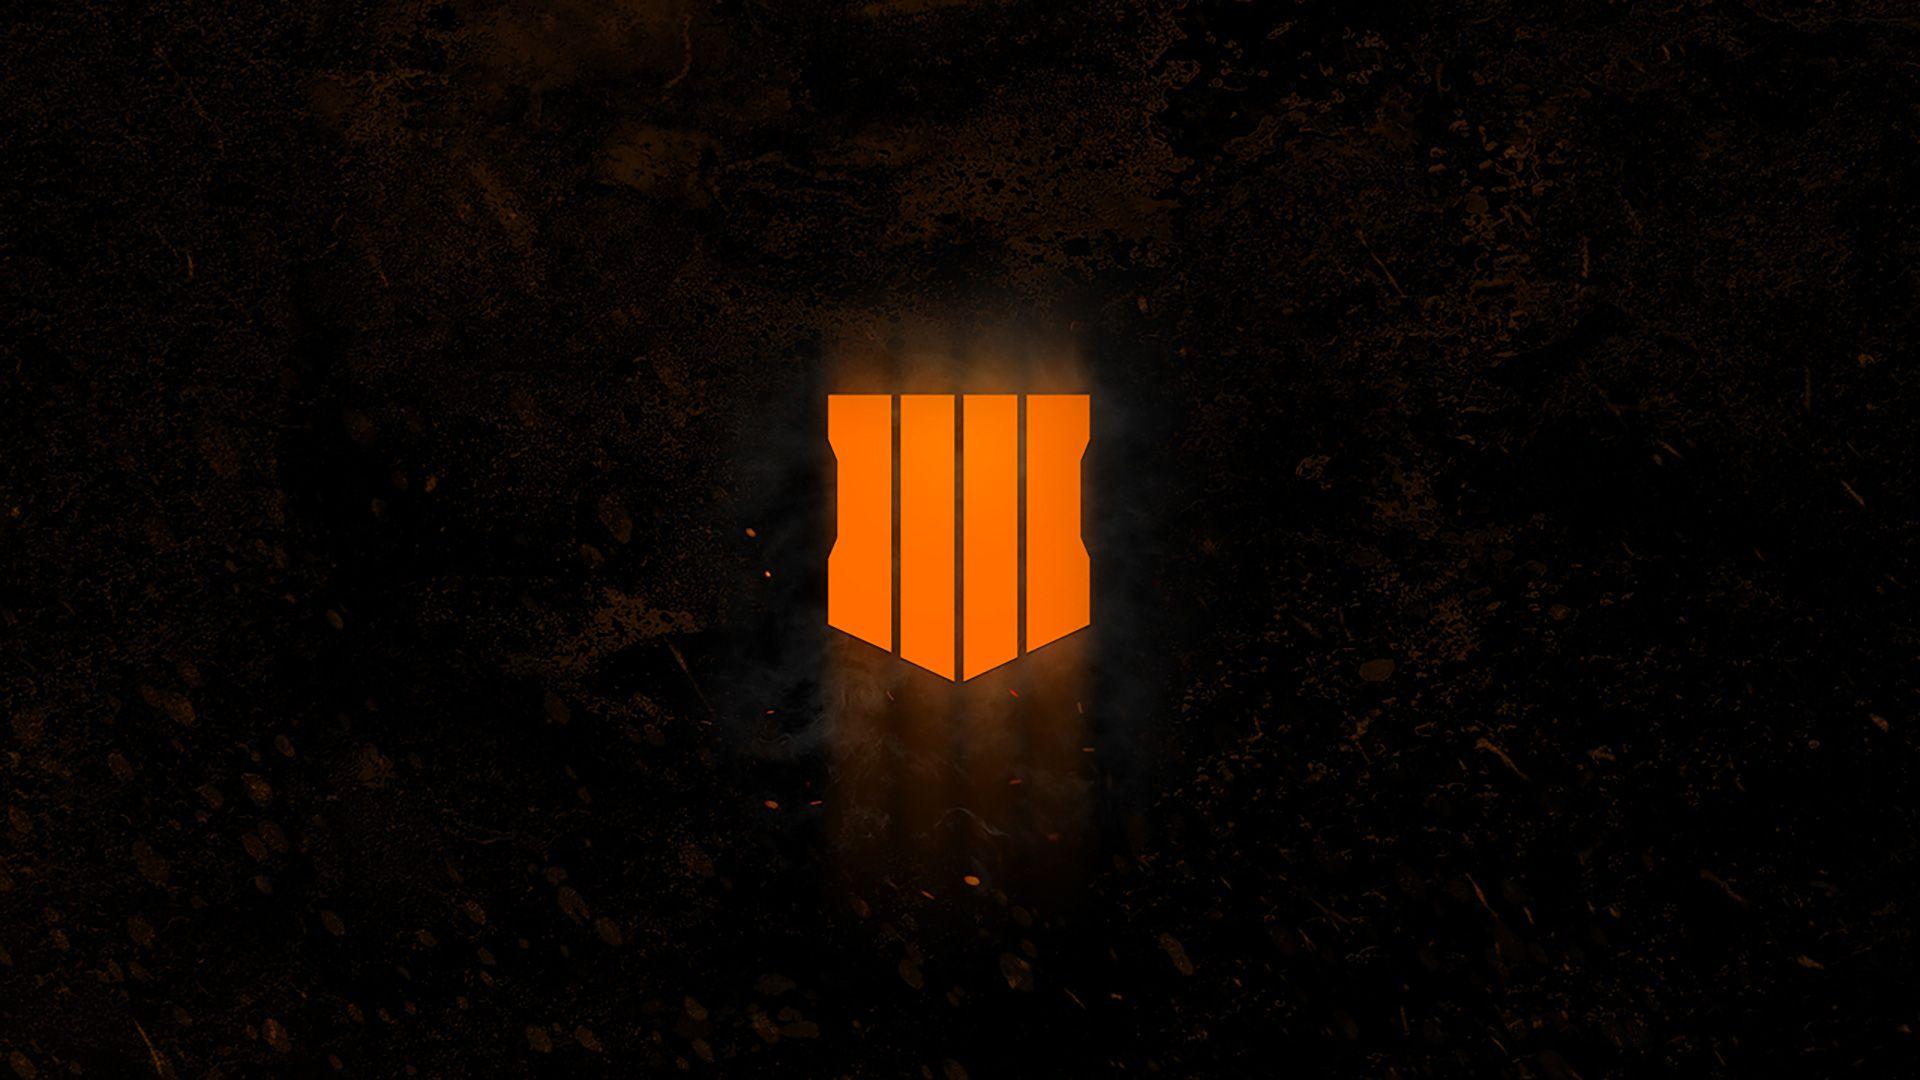 Call Of Duty Black Ops 4 Logo Wallpapers 65180 1920x1080px.